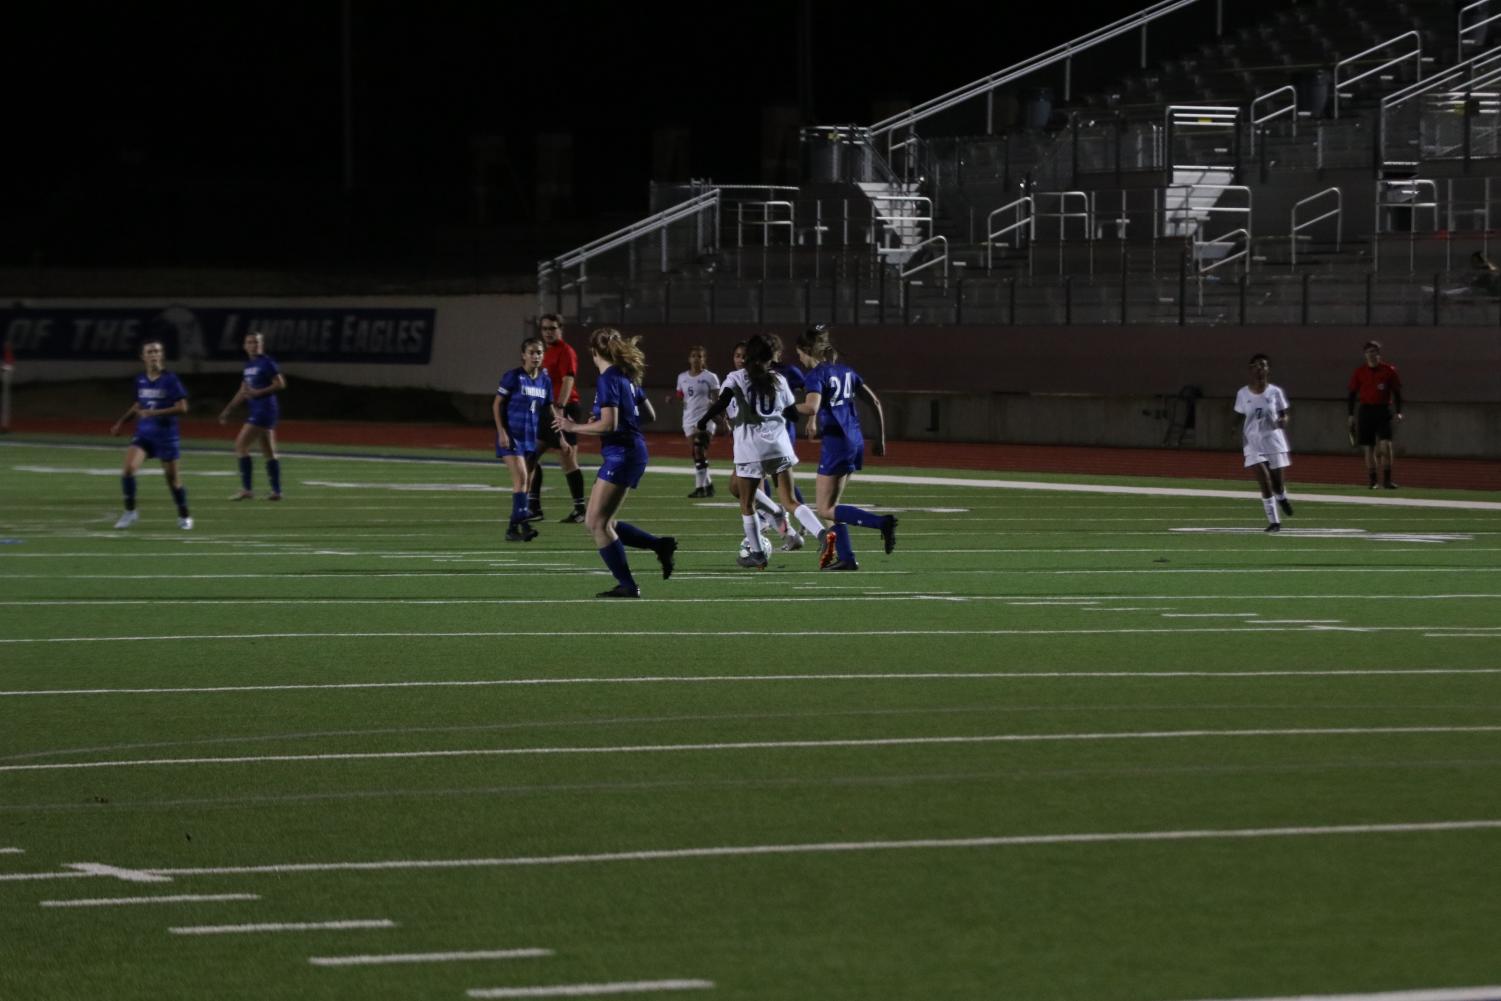 The Varsity girls soccer team plays against Cumberland. They won 8-0.